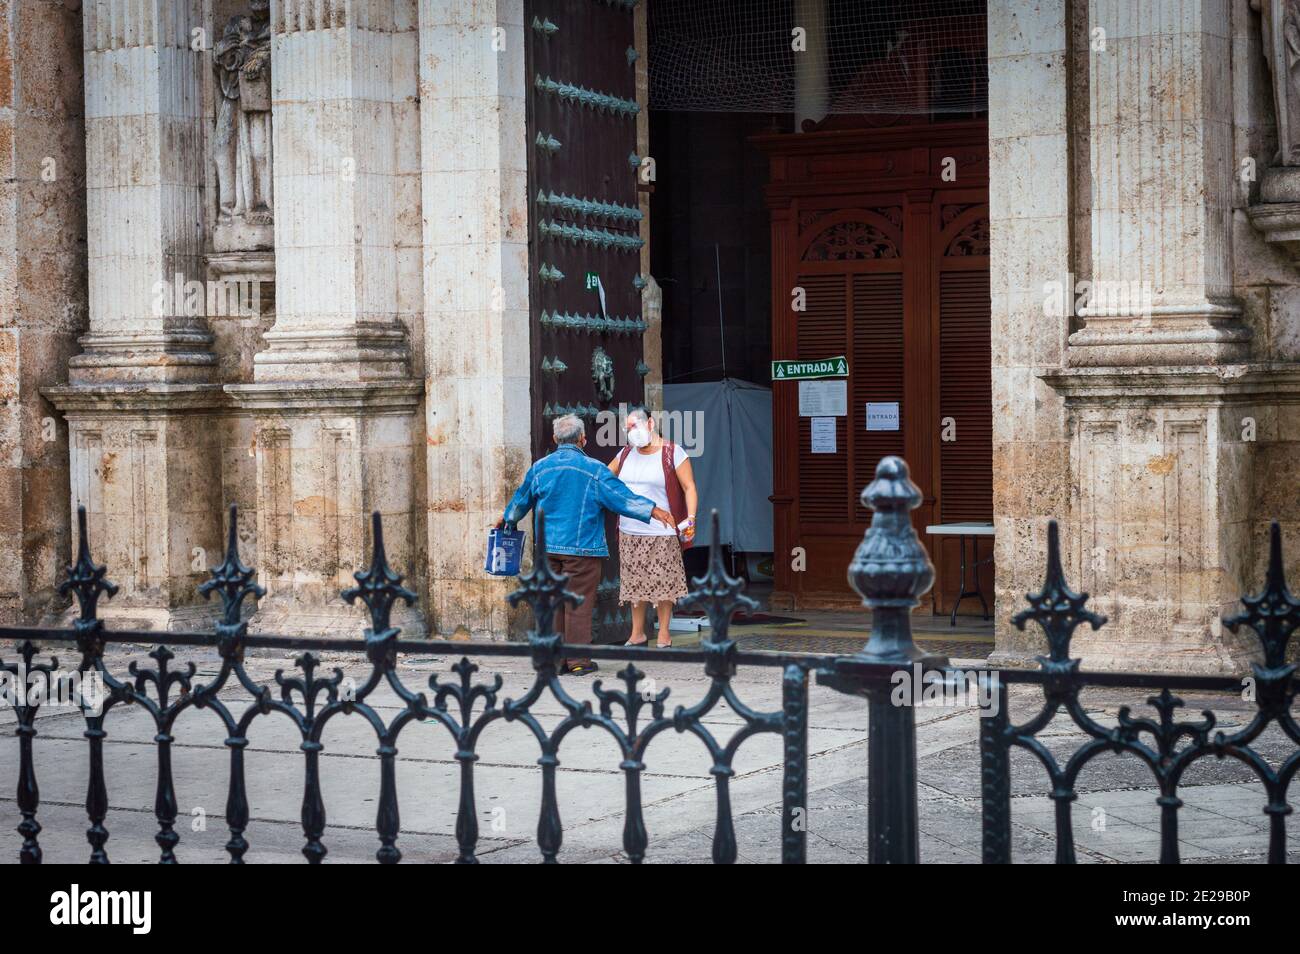 New Normal Mexico, entrance of the Cathedral in Merida, Yucatan. Sanitizing gel and temperature screening during the Covid Pandemic. Stock Photo